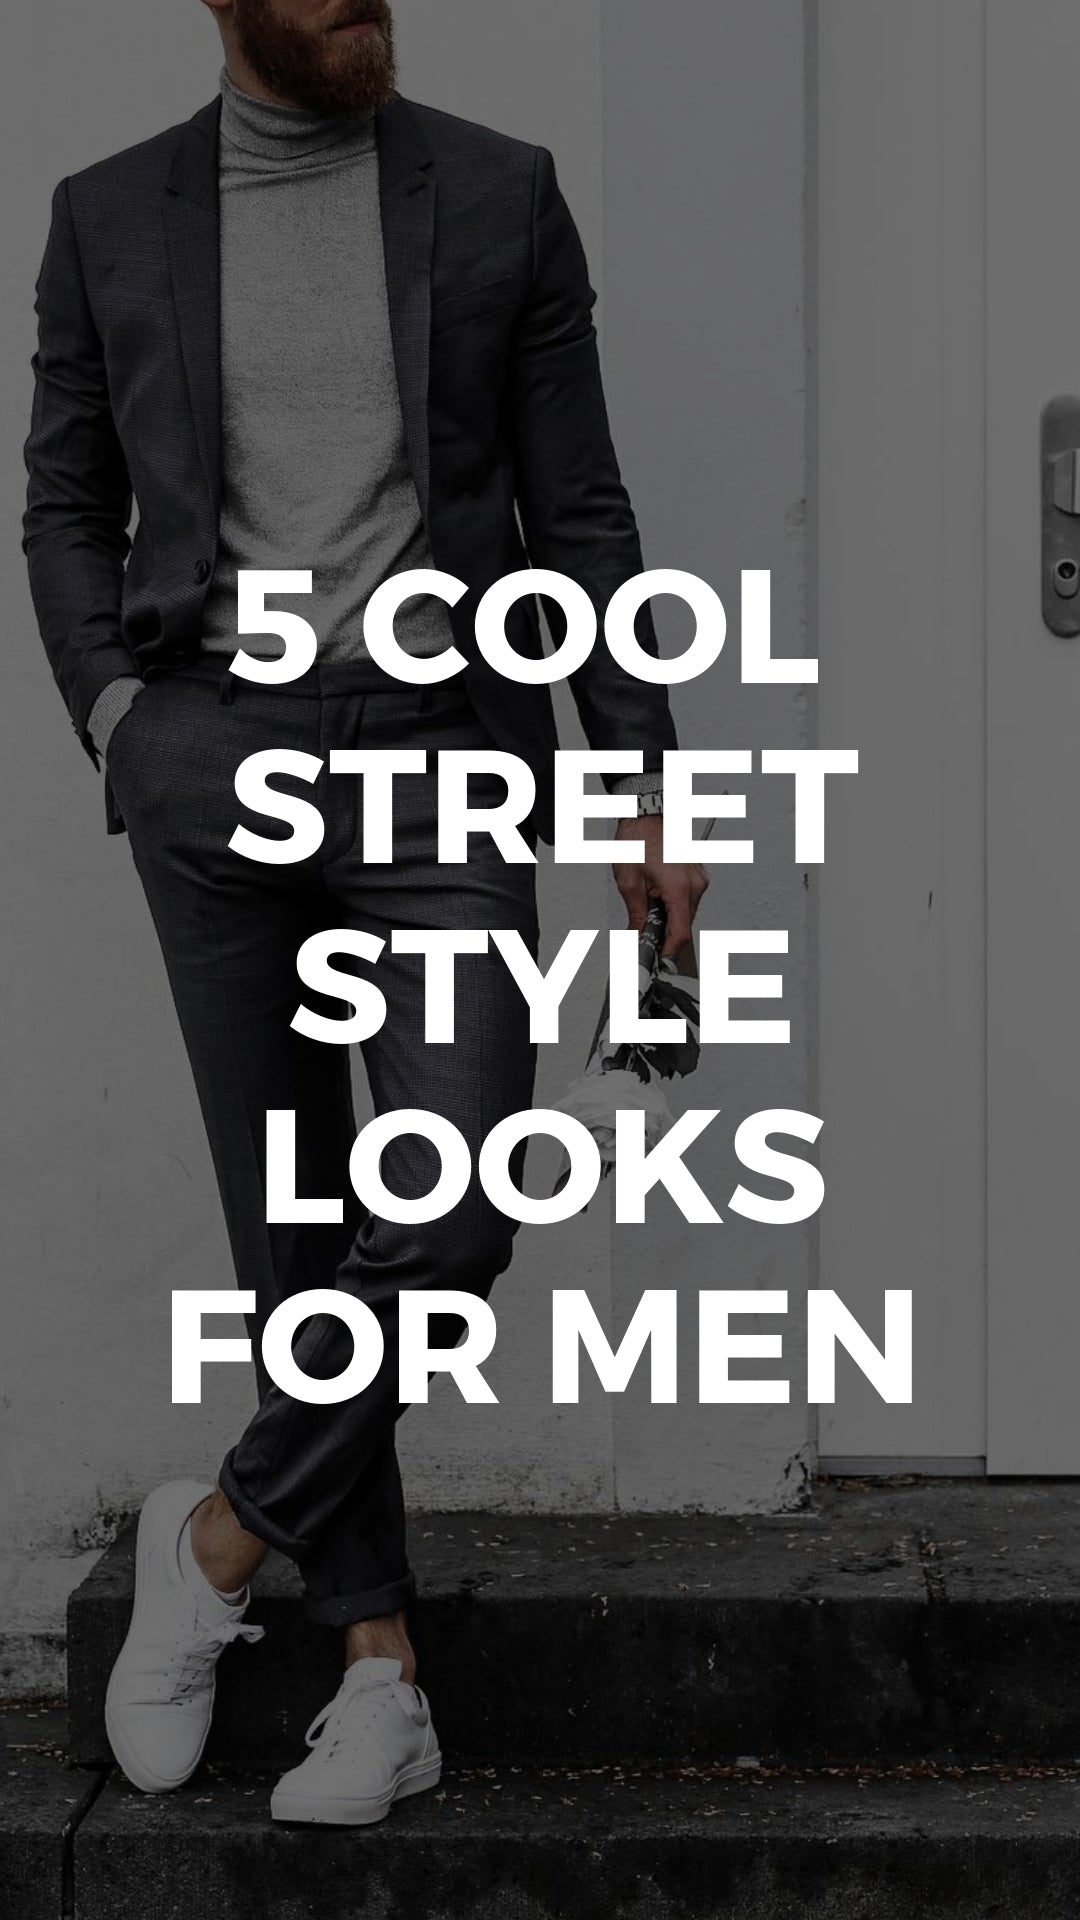 Looking for some cool street style inspo? Look no further. Follow this guy and copy how he dresses to look your best. #street #style #mens #fashion